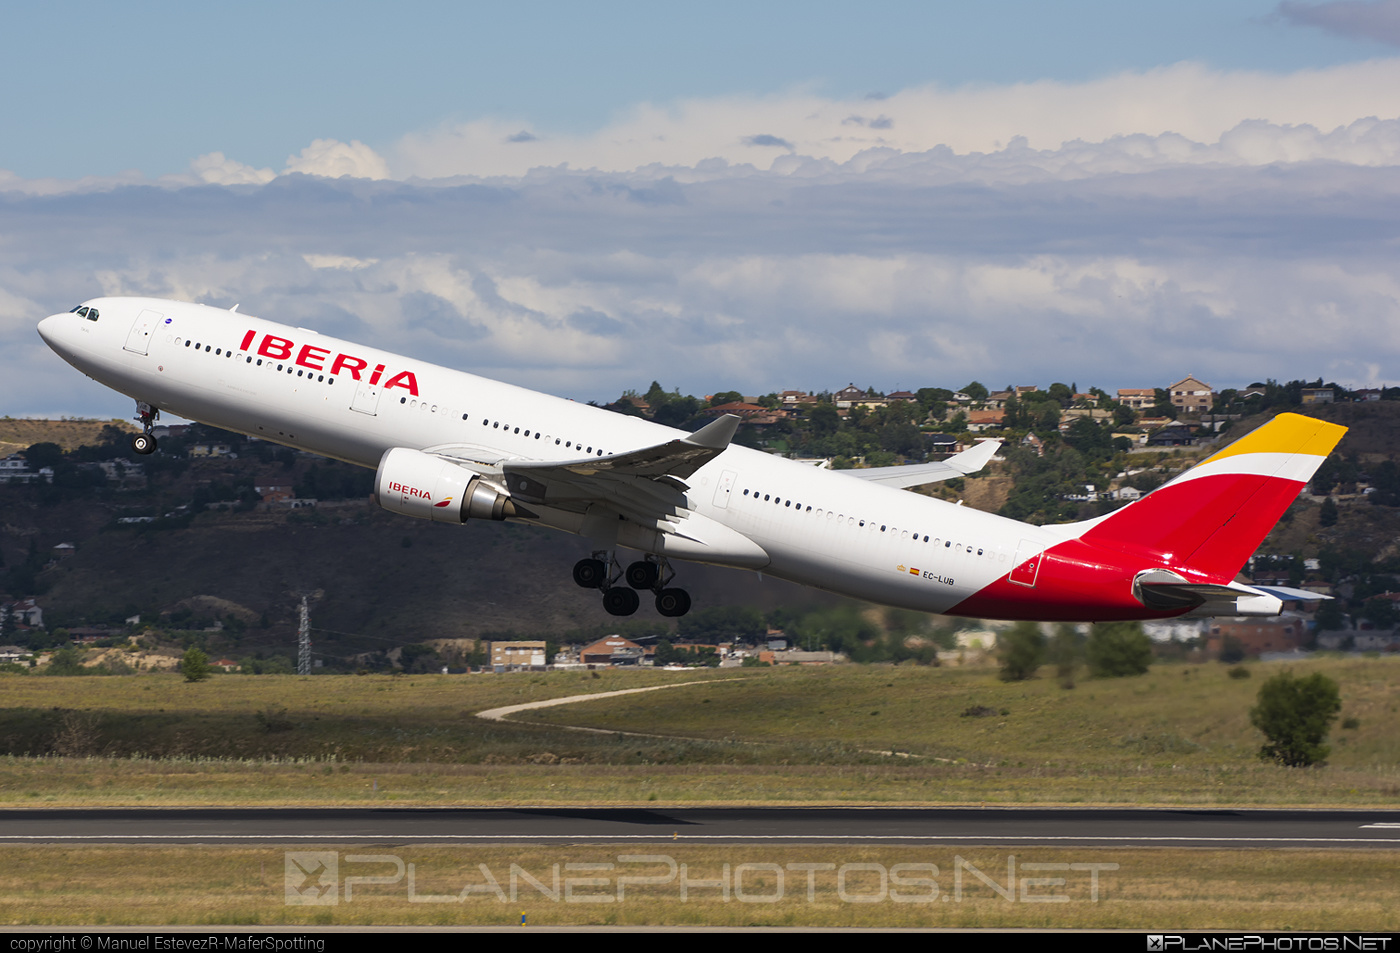 Airbus A330-302 - EC-LUB operated by Iberia #a330 #a330family #airbus #airbus330 #iberia